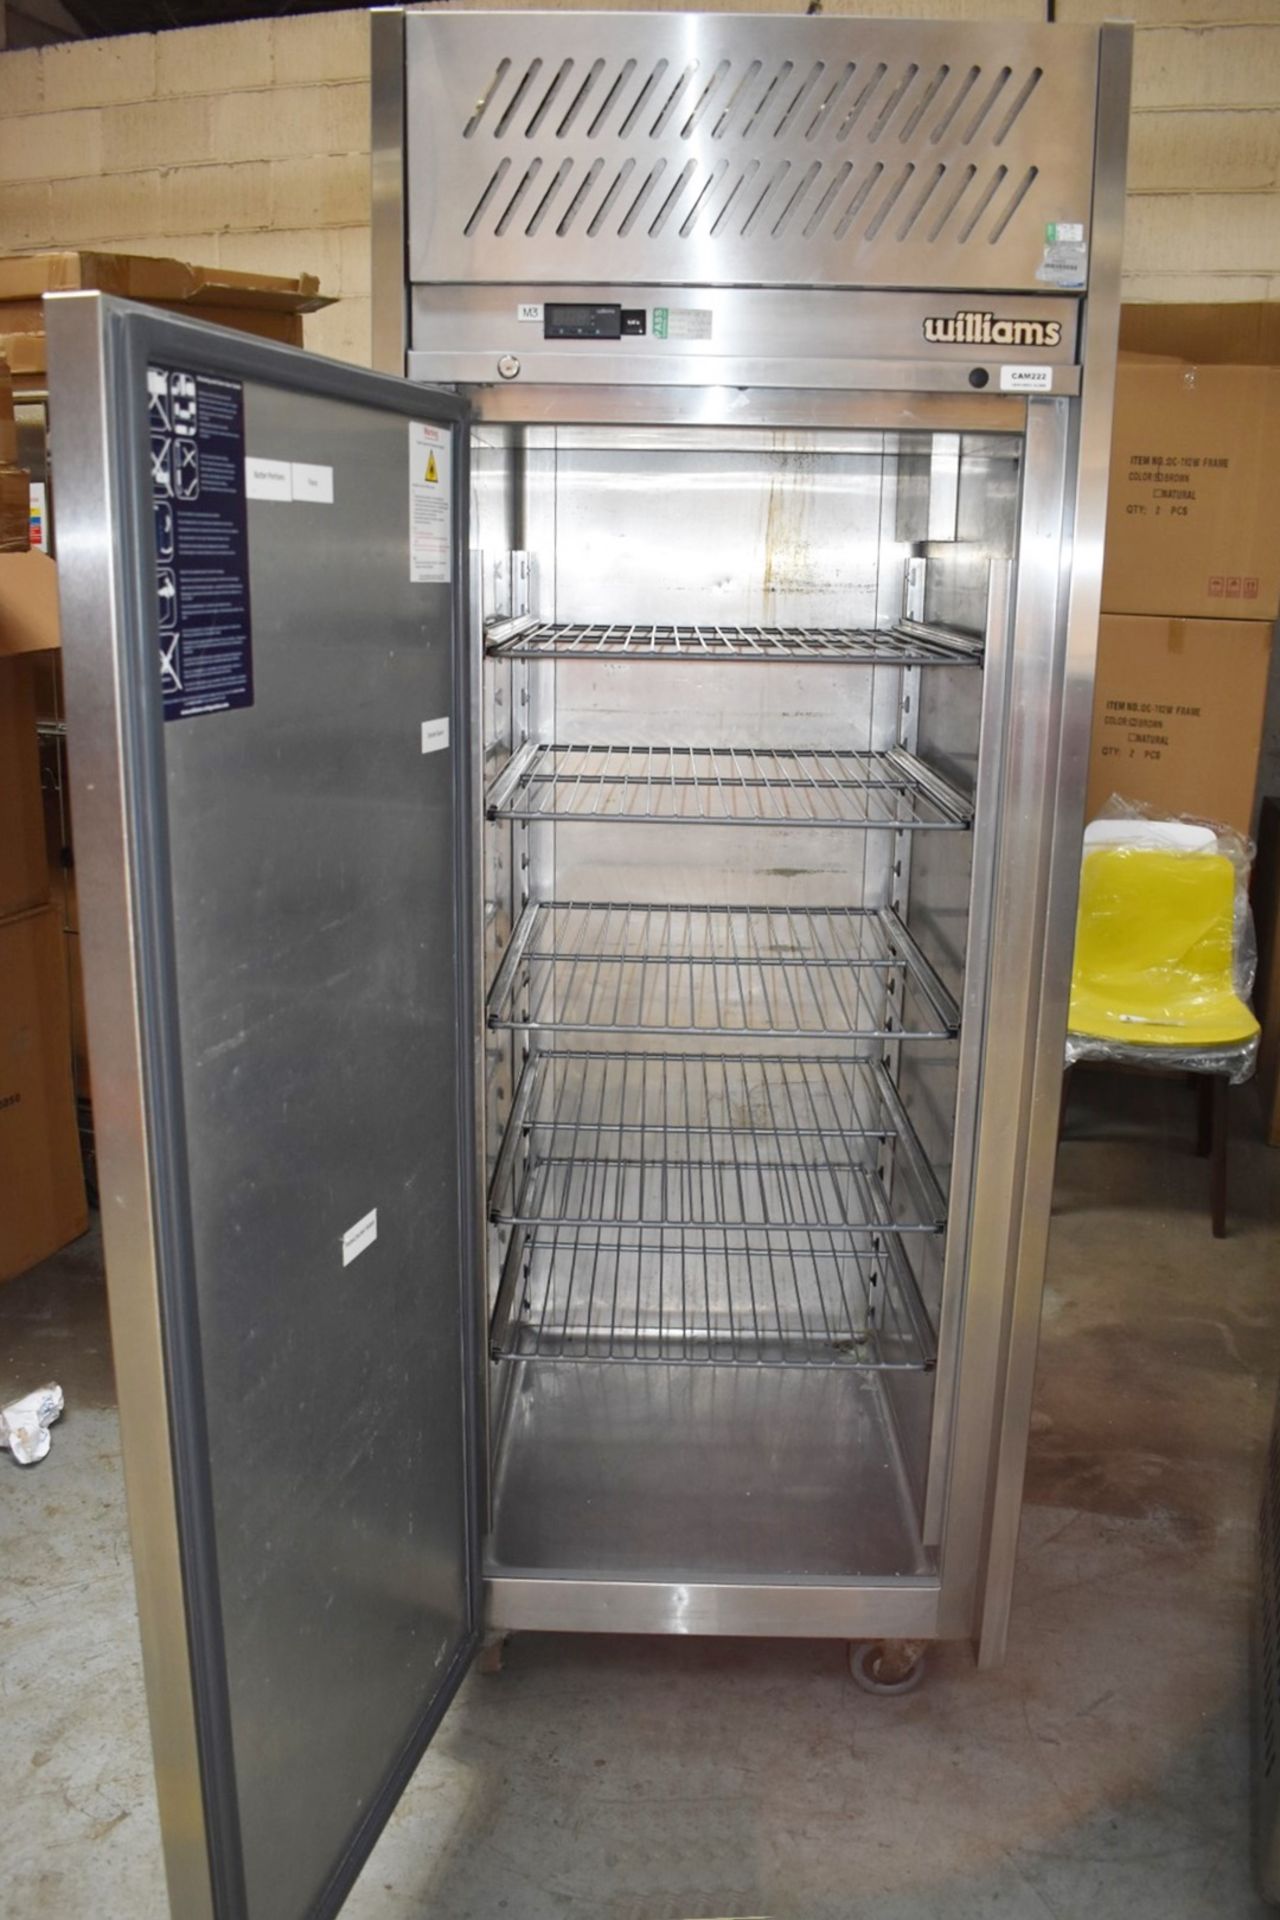 1 x Williams Upright Single Door Refrigerator With Stainless Steel Exterior - Model HJ1TSA - Image 6 of 10